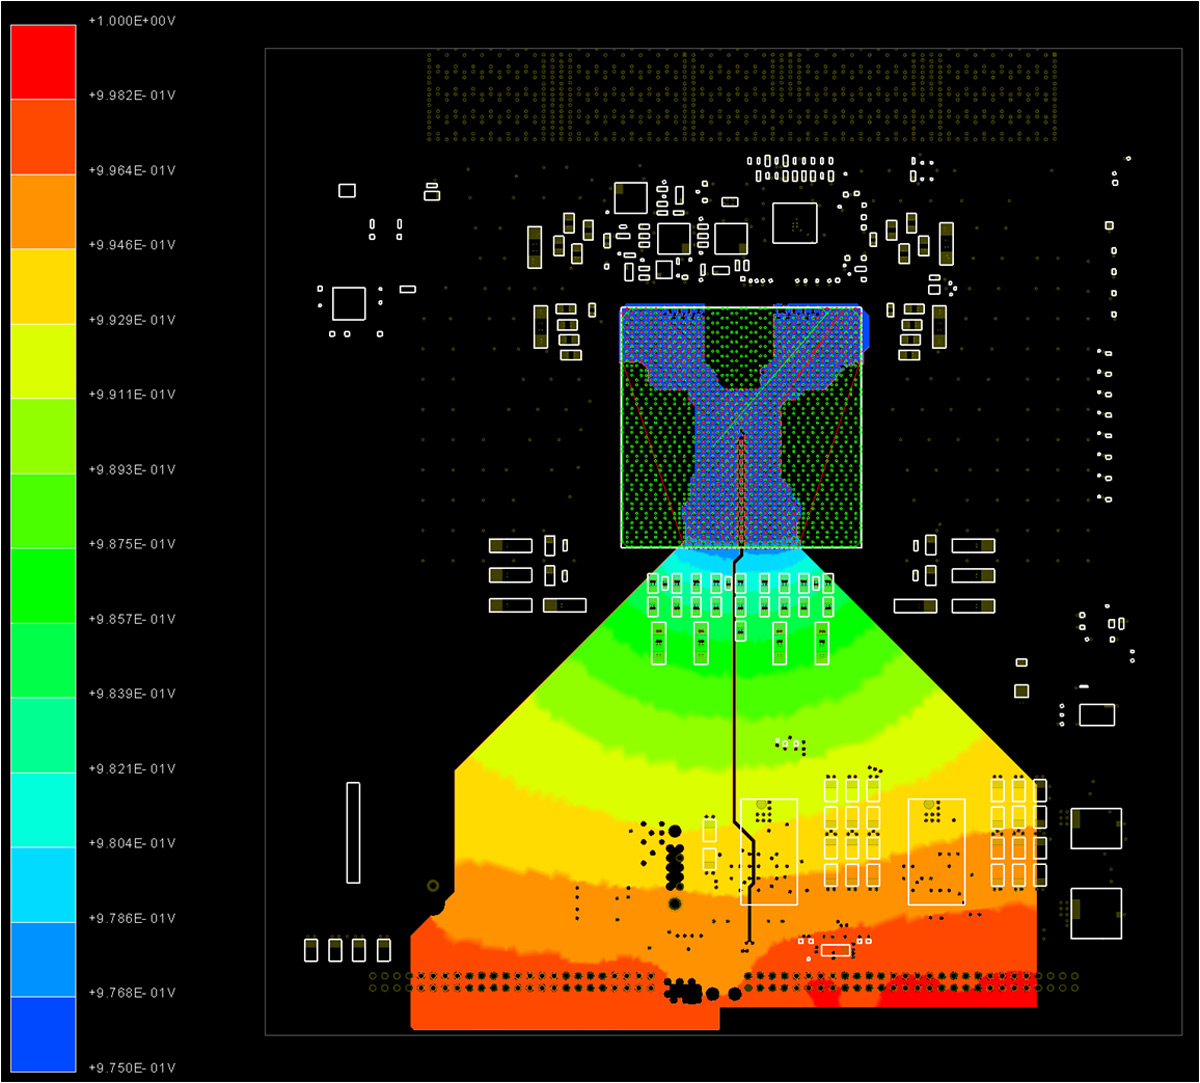 Expanded view of a section of the map of current density in printed circuit board conductors, showing voltage gradients across the ASIC and in the region on the circuit board